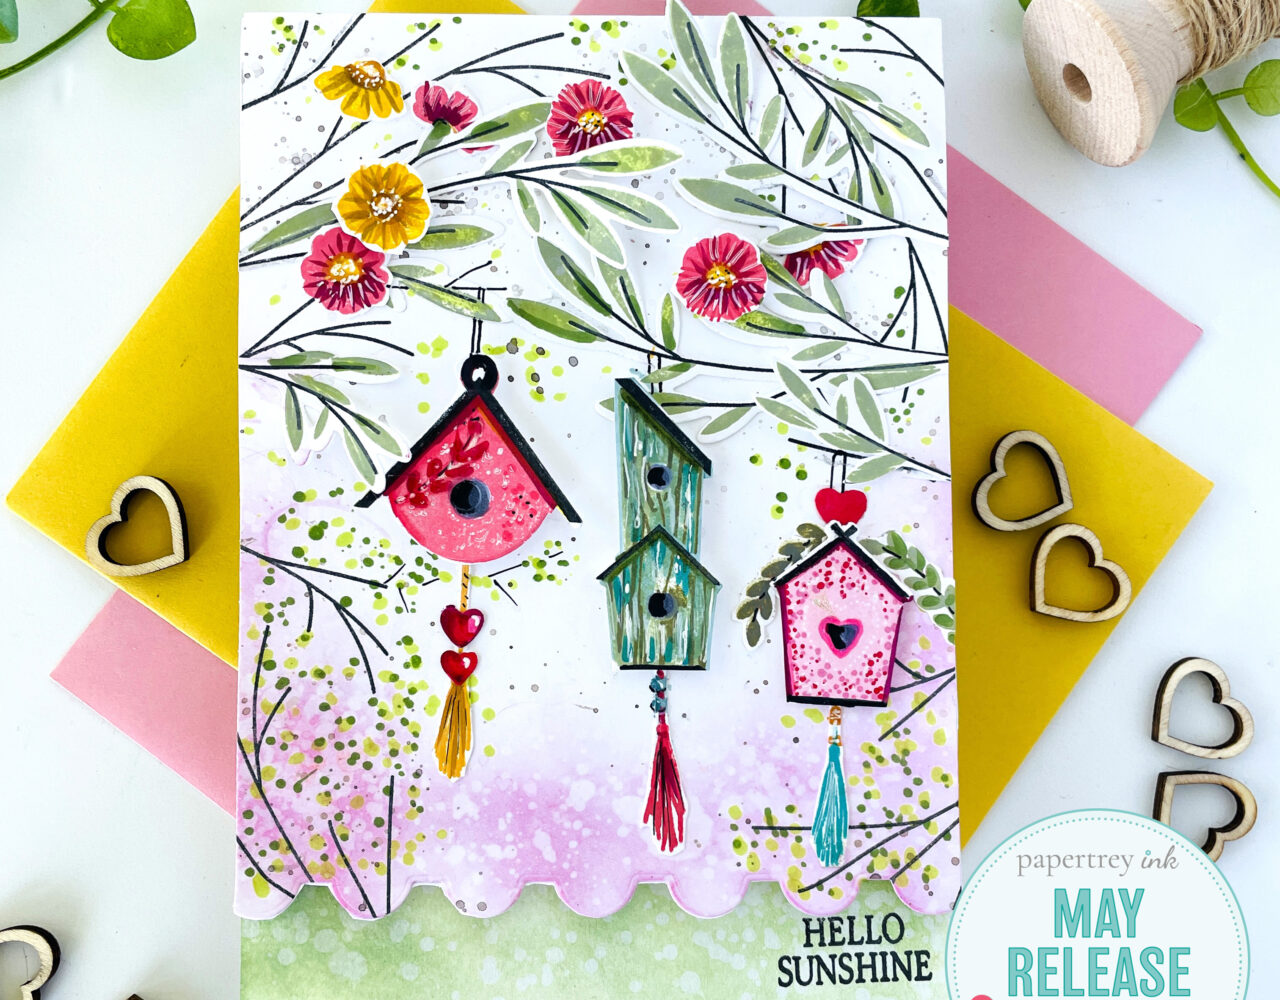 Birdhouse Bliss by Papertrey Ink